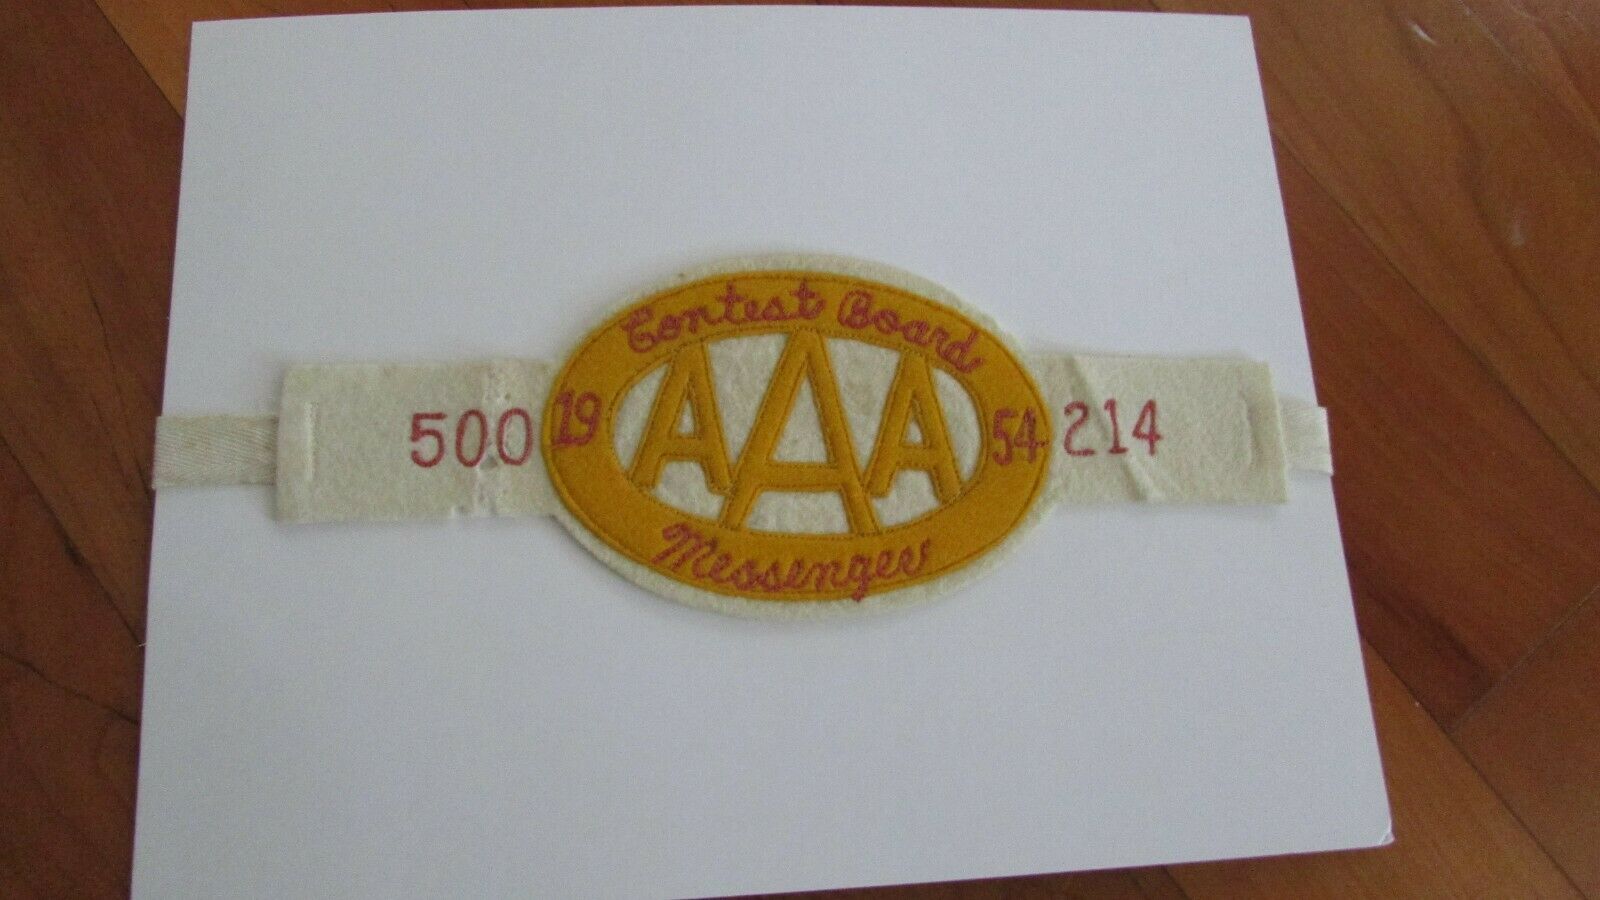 Indy 500 1954 Aaa Armband Officials Identification Sanctioning Body Embroidered